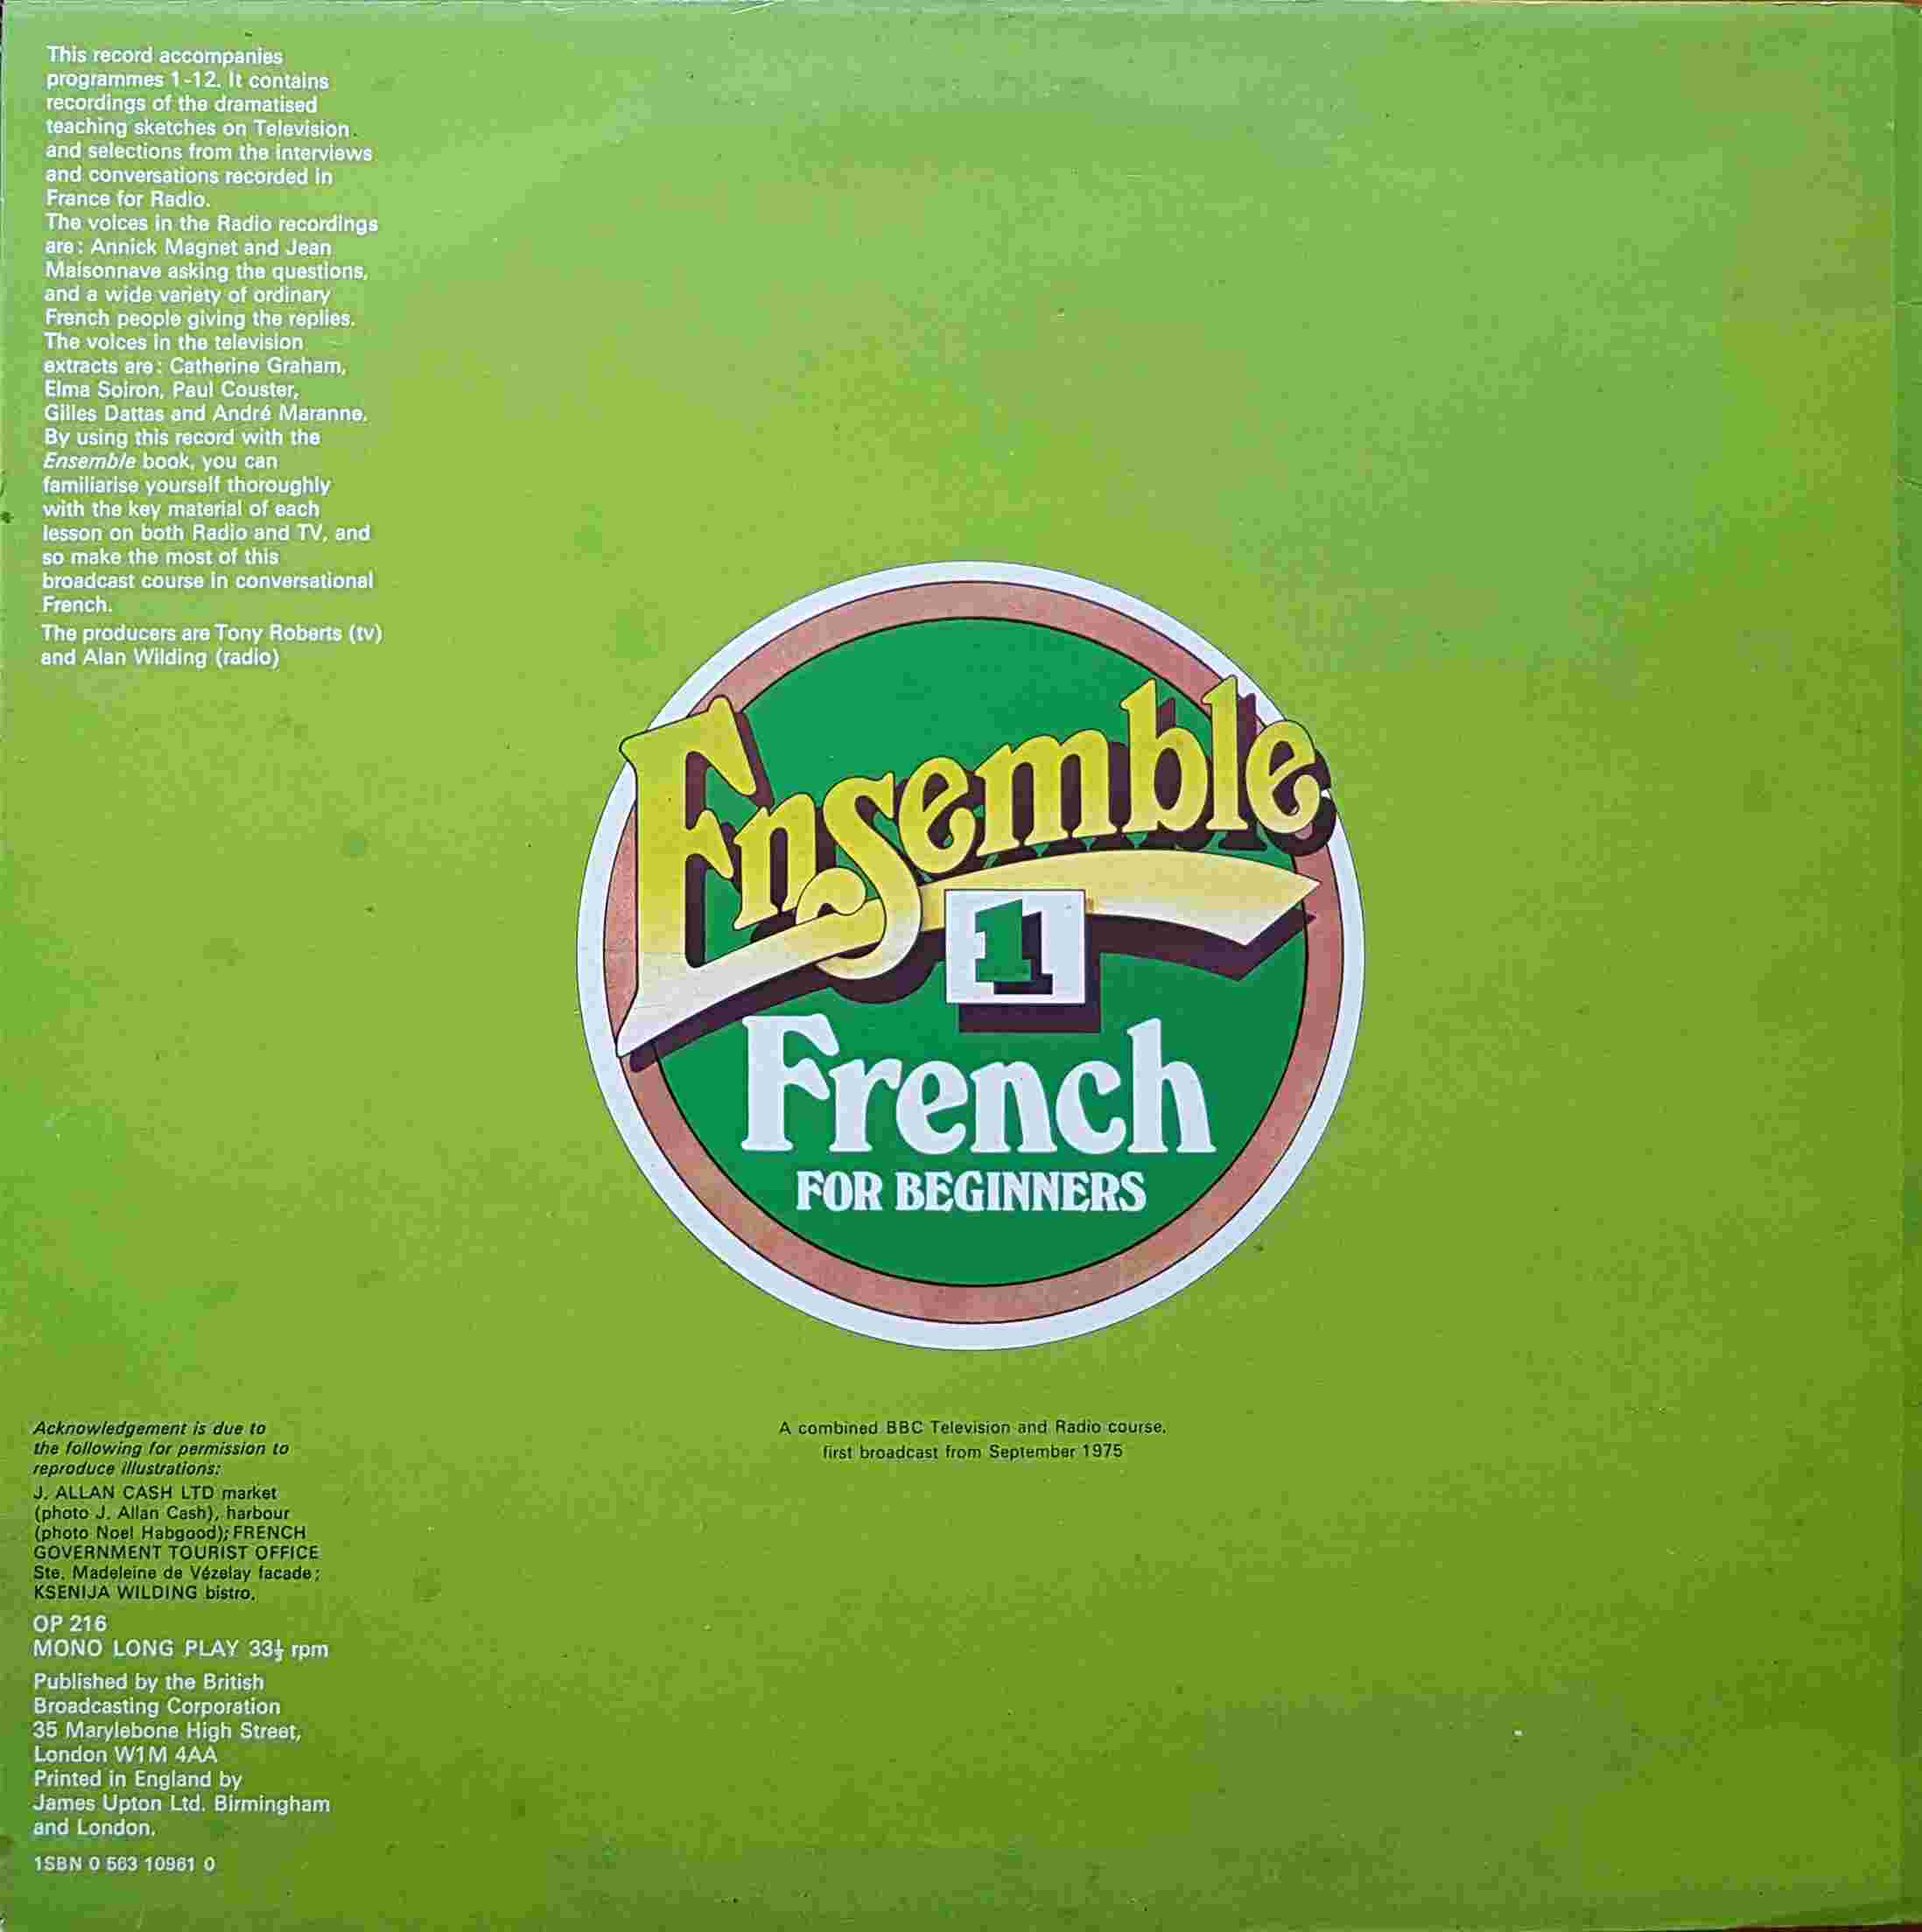 Picture of OP 216 Ensemble 1 - French for beginners - Programmes 1 - 12 by artist Various from the BBC records and Tapes library